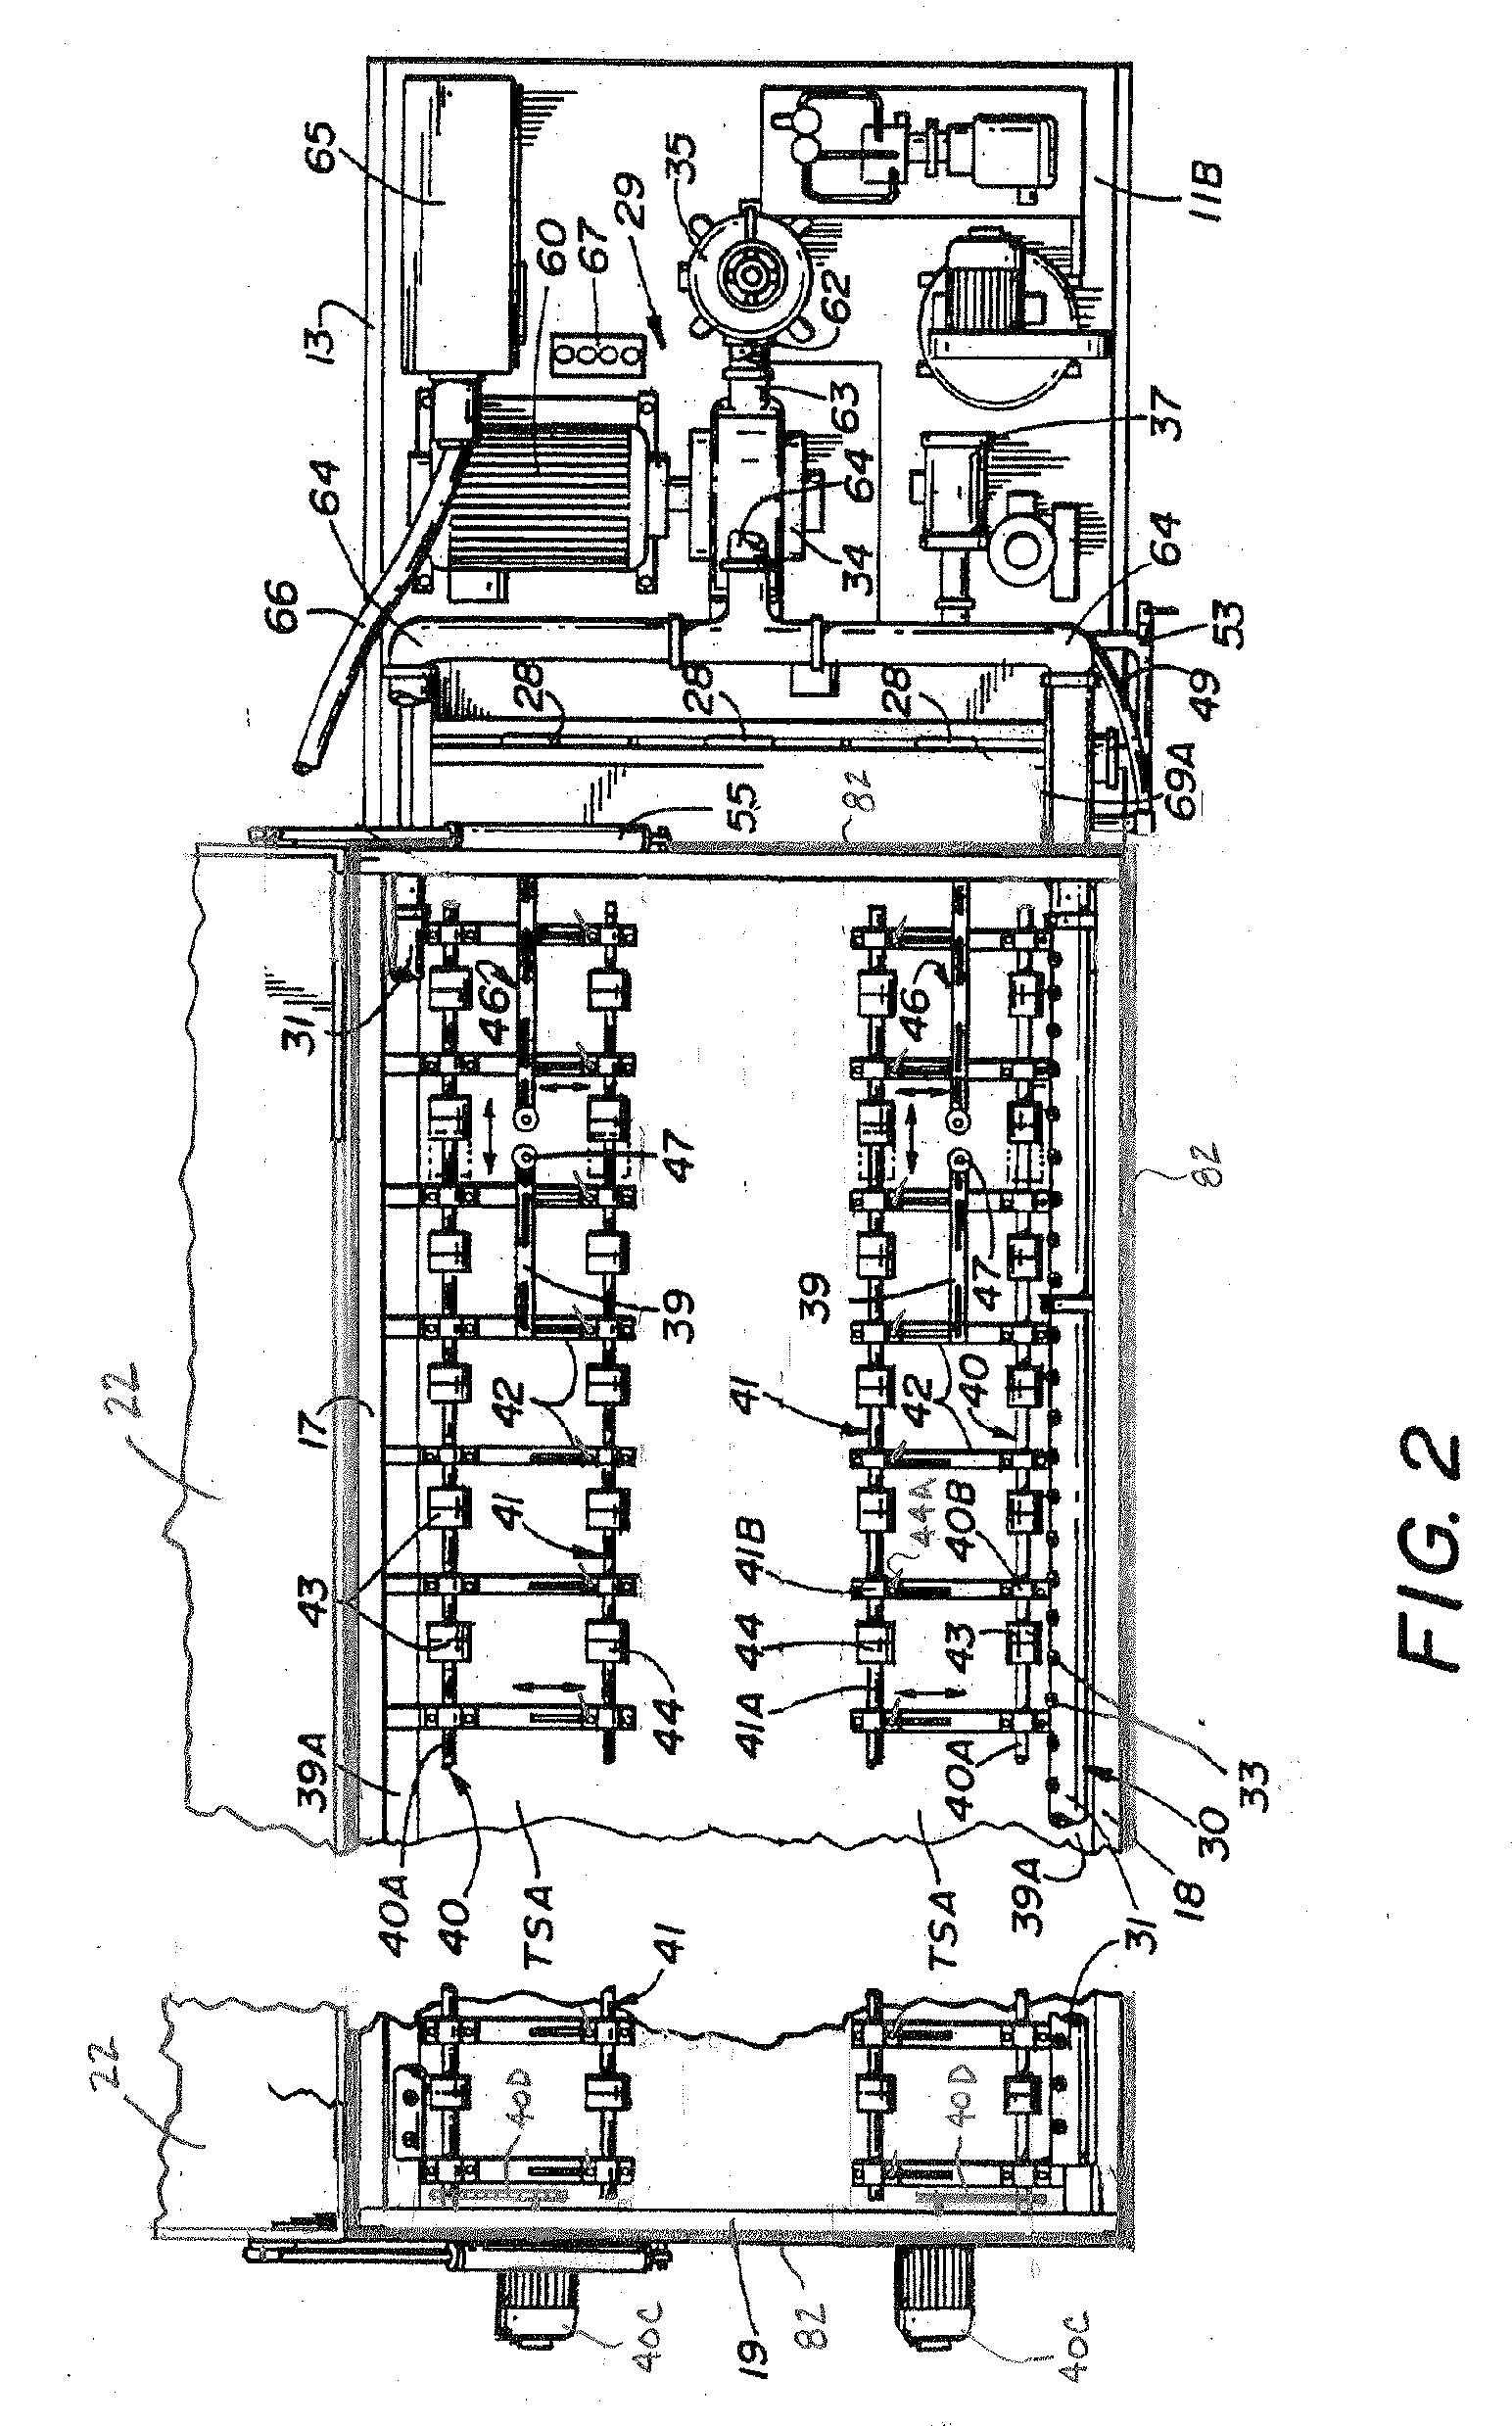 Method and system for cleaning heat exchanger tube bundles